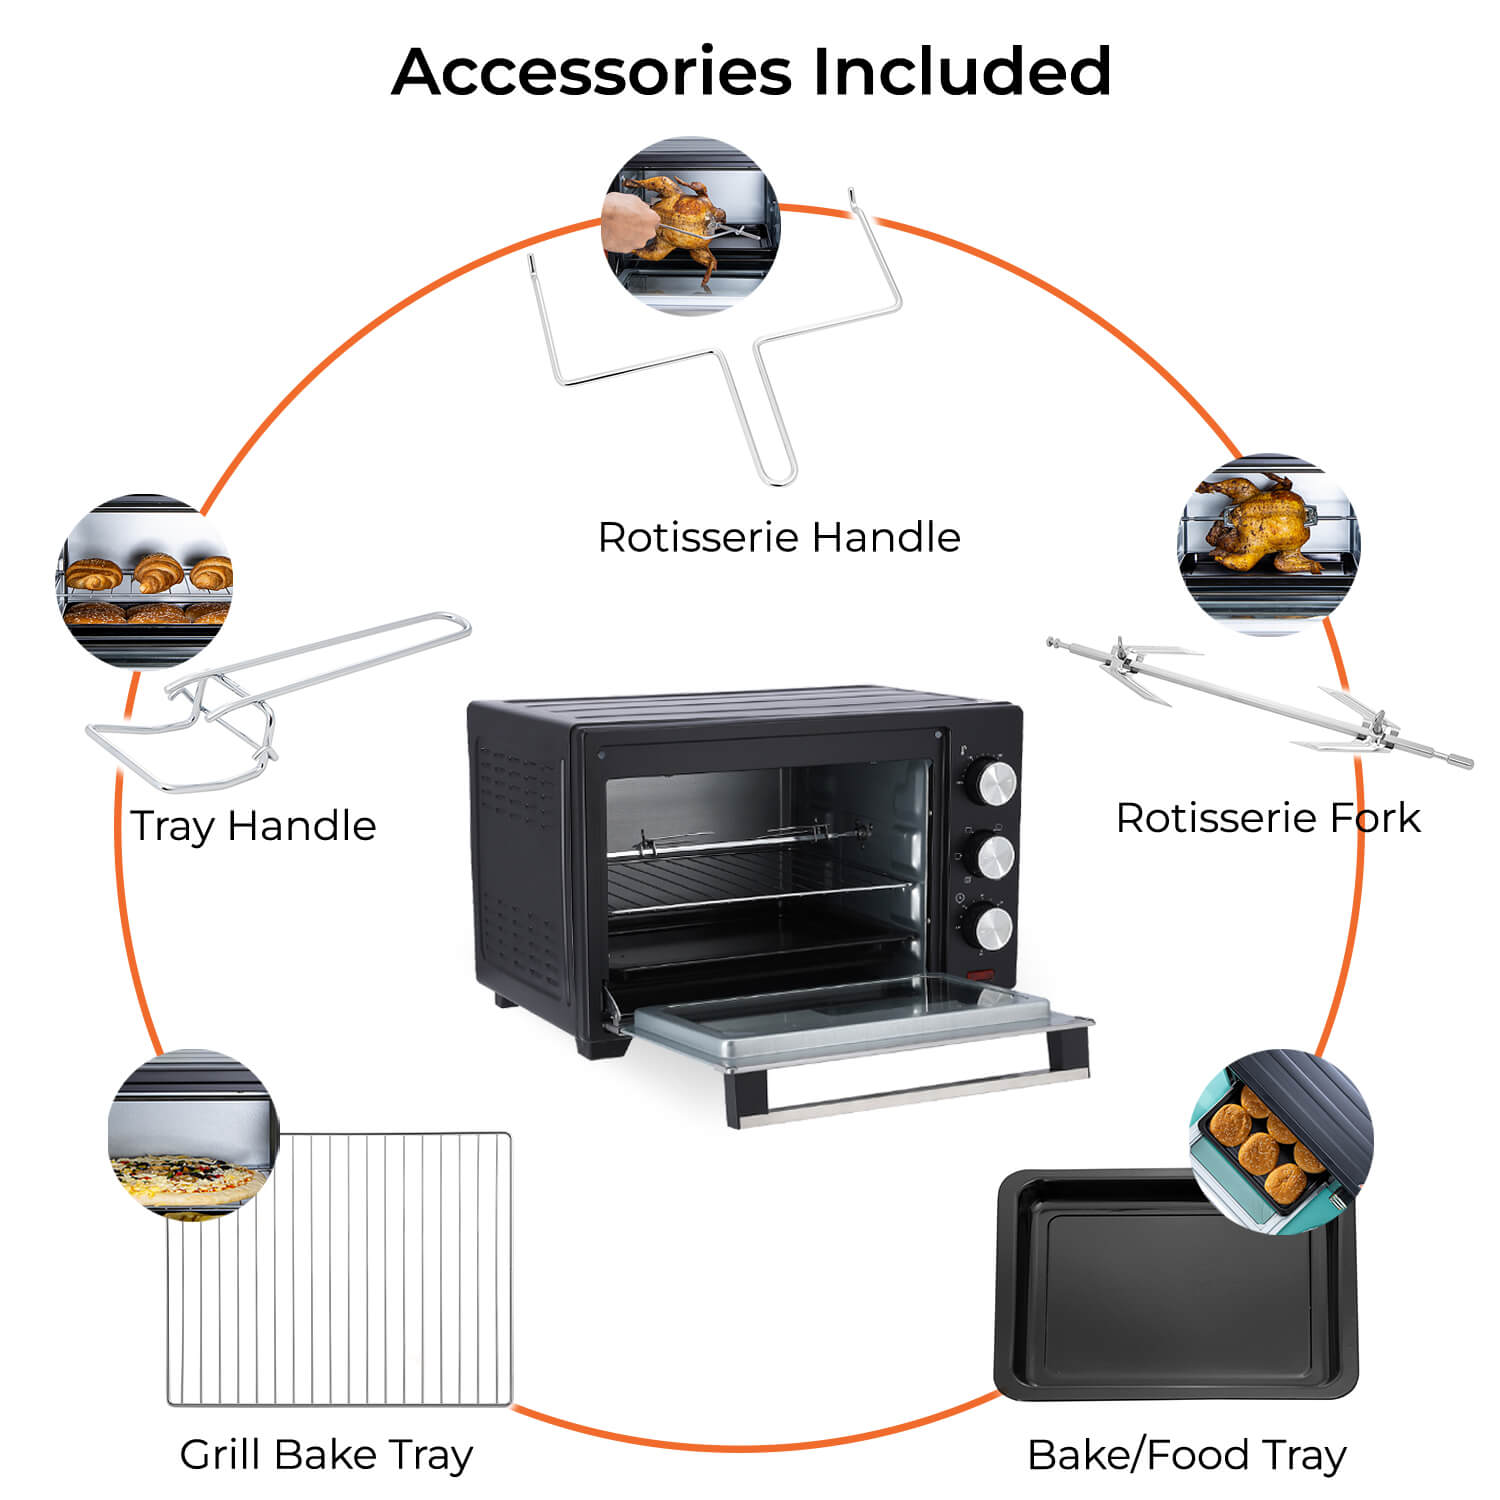 30L Electric Mini Oven and Grill Cooker With Rotisserie